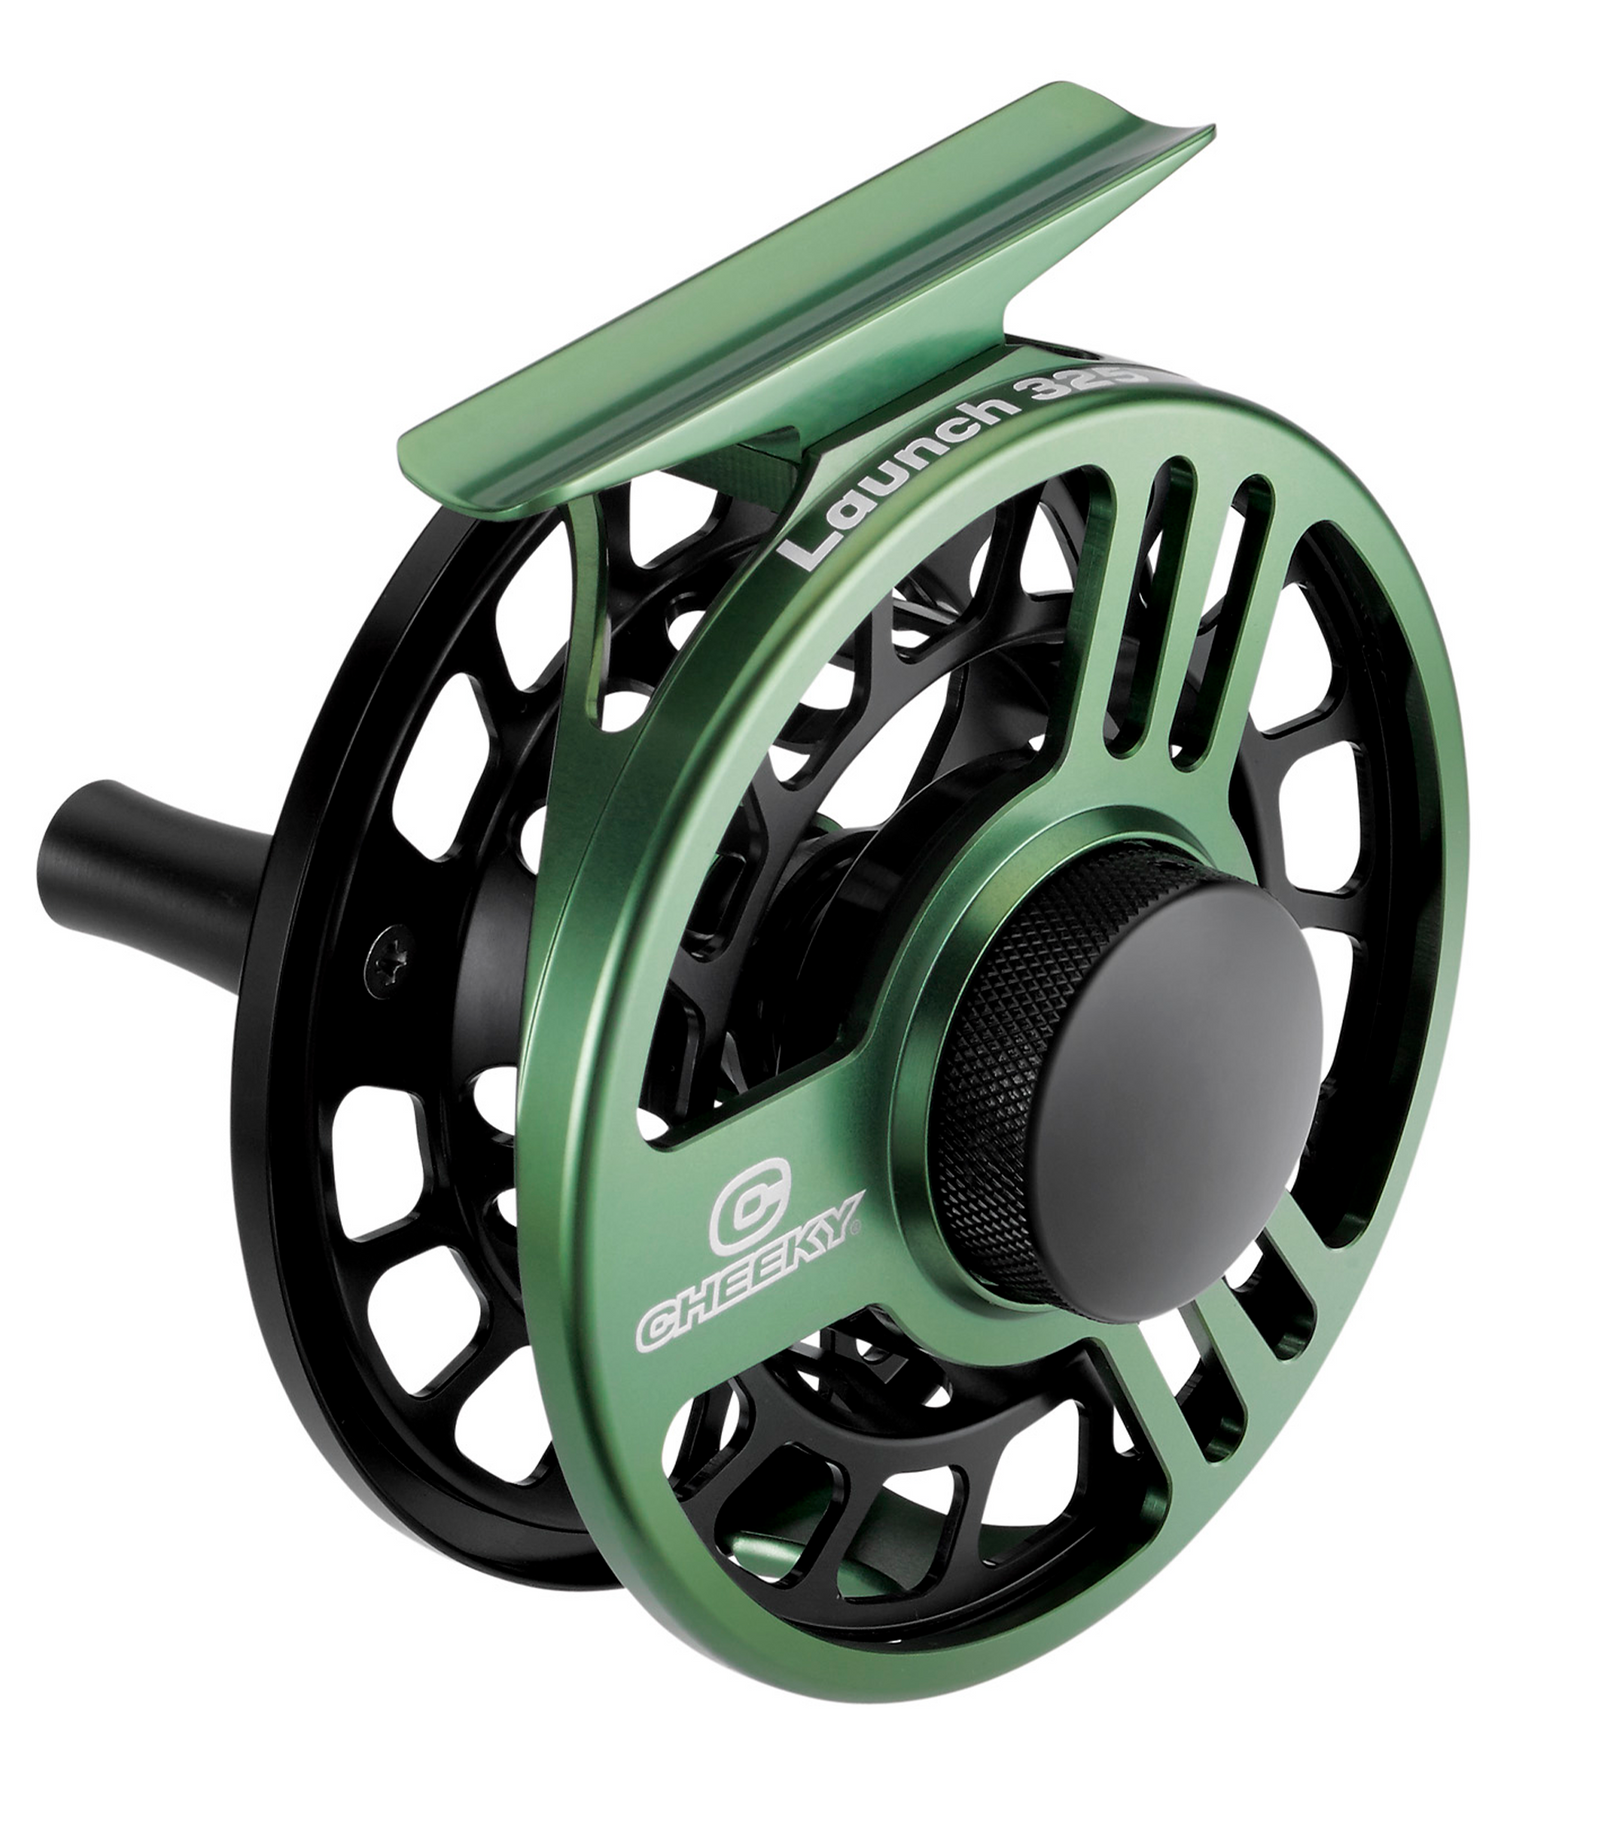 Shop Cheeky Fishing Launch Fly Reel Series Online